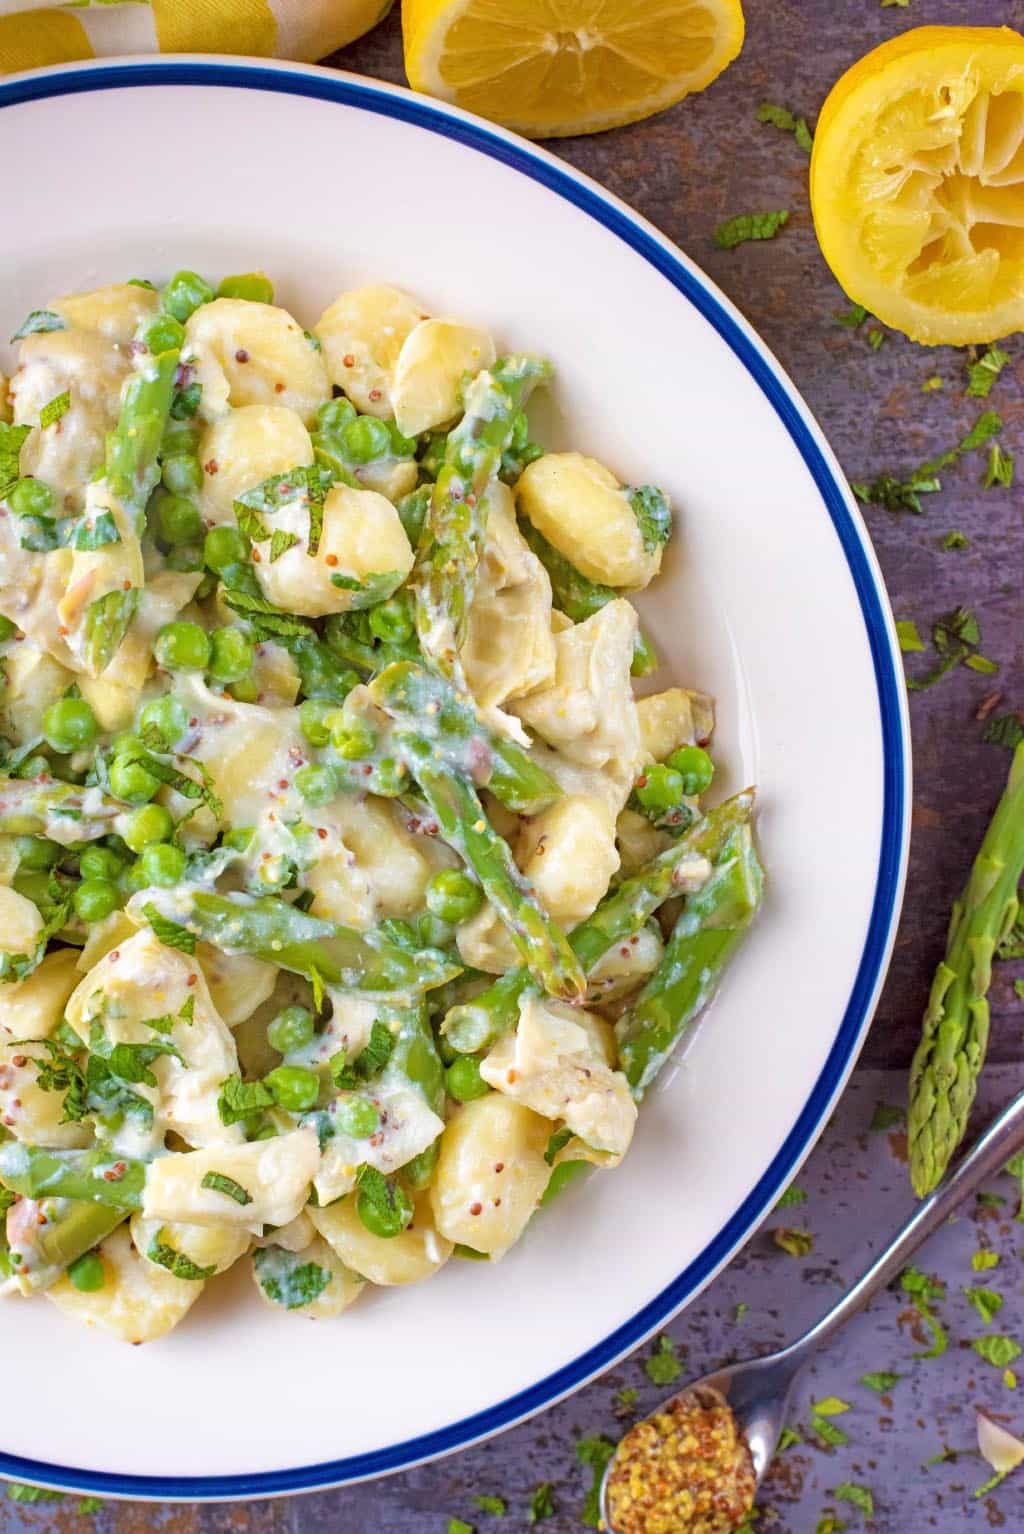 Cooked gnocchi and green vegetables in a creamy sauce.